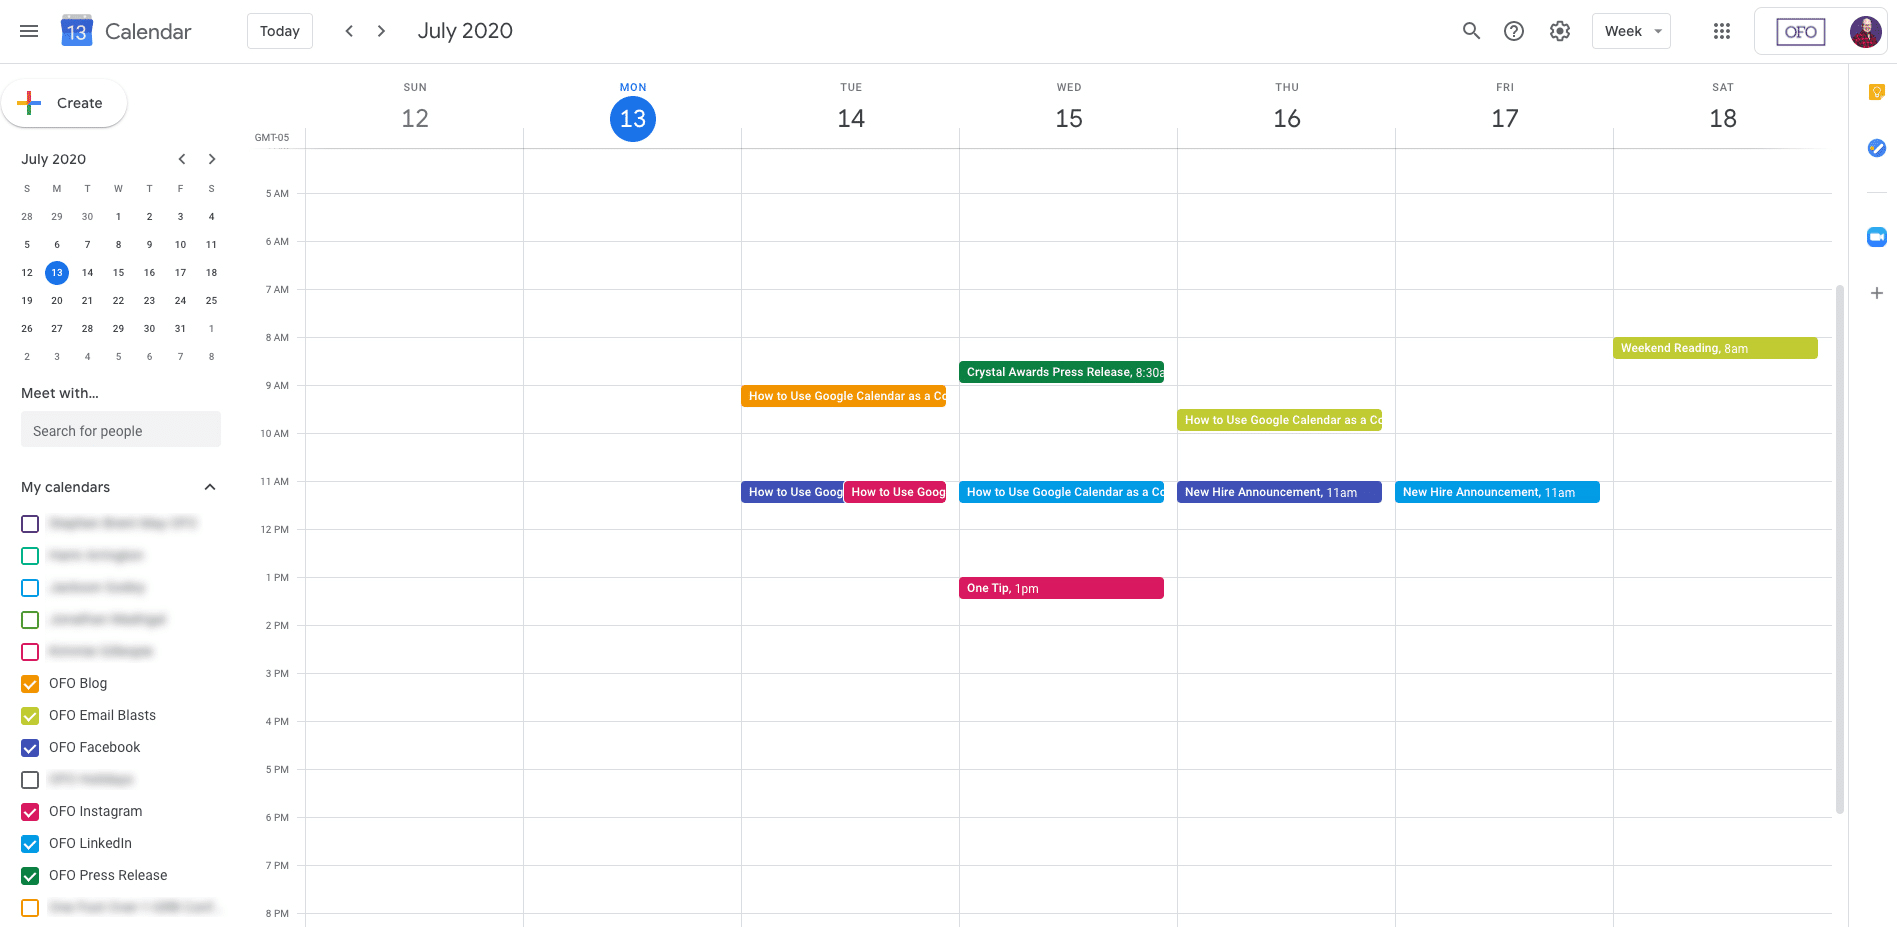 A fully populated Google Content Calendar